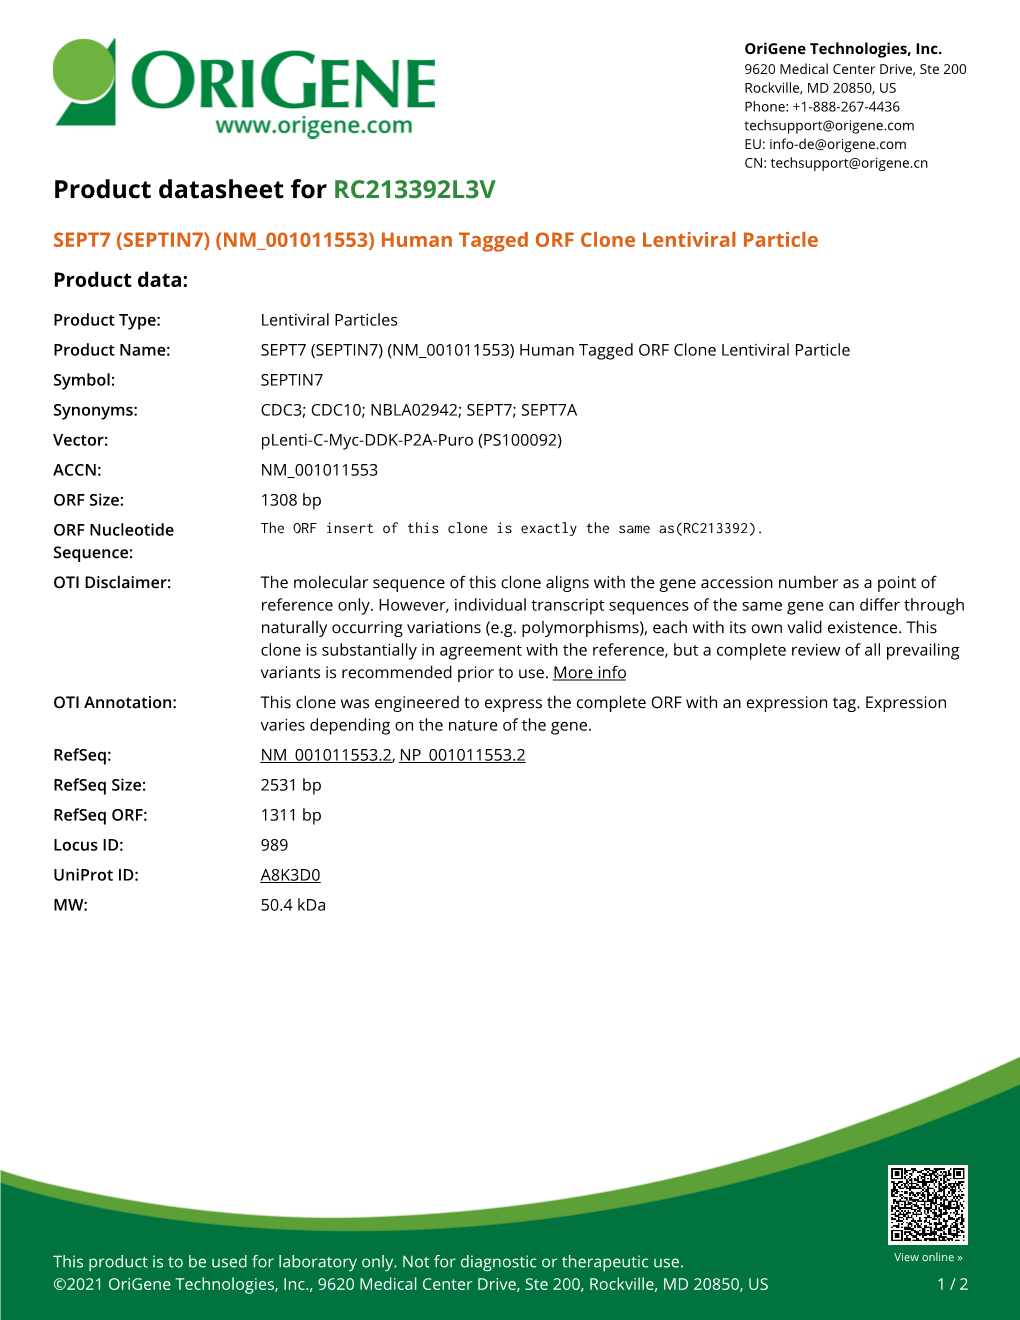 SEPT7 (SEPTIN7) (NM 001011553) Human Tagged ORF Clone Lentiviral Particle Product Data